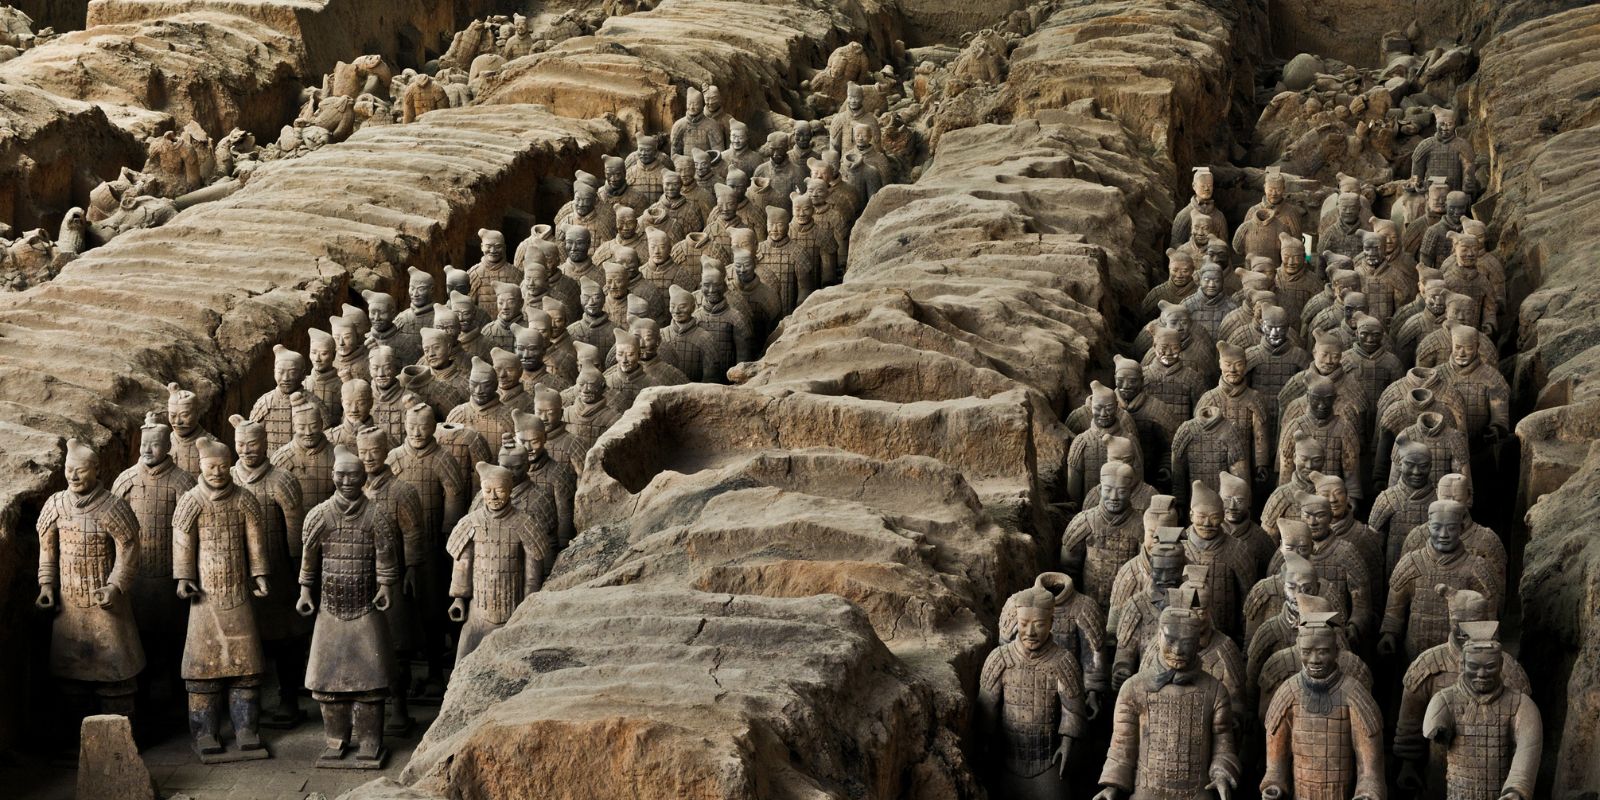 March 29th: Farmers In Lintong County Brought The Terracotta Army To Life